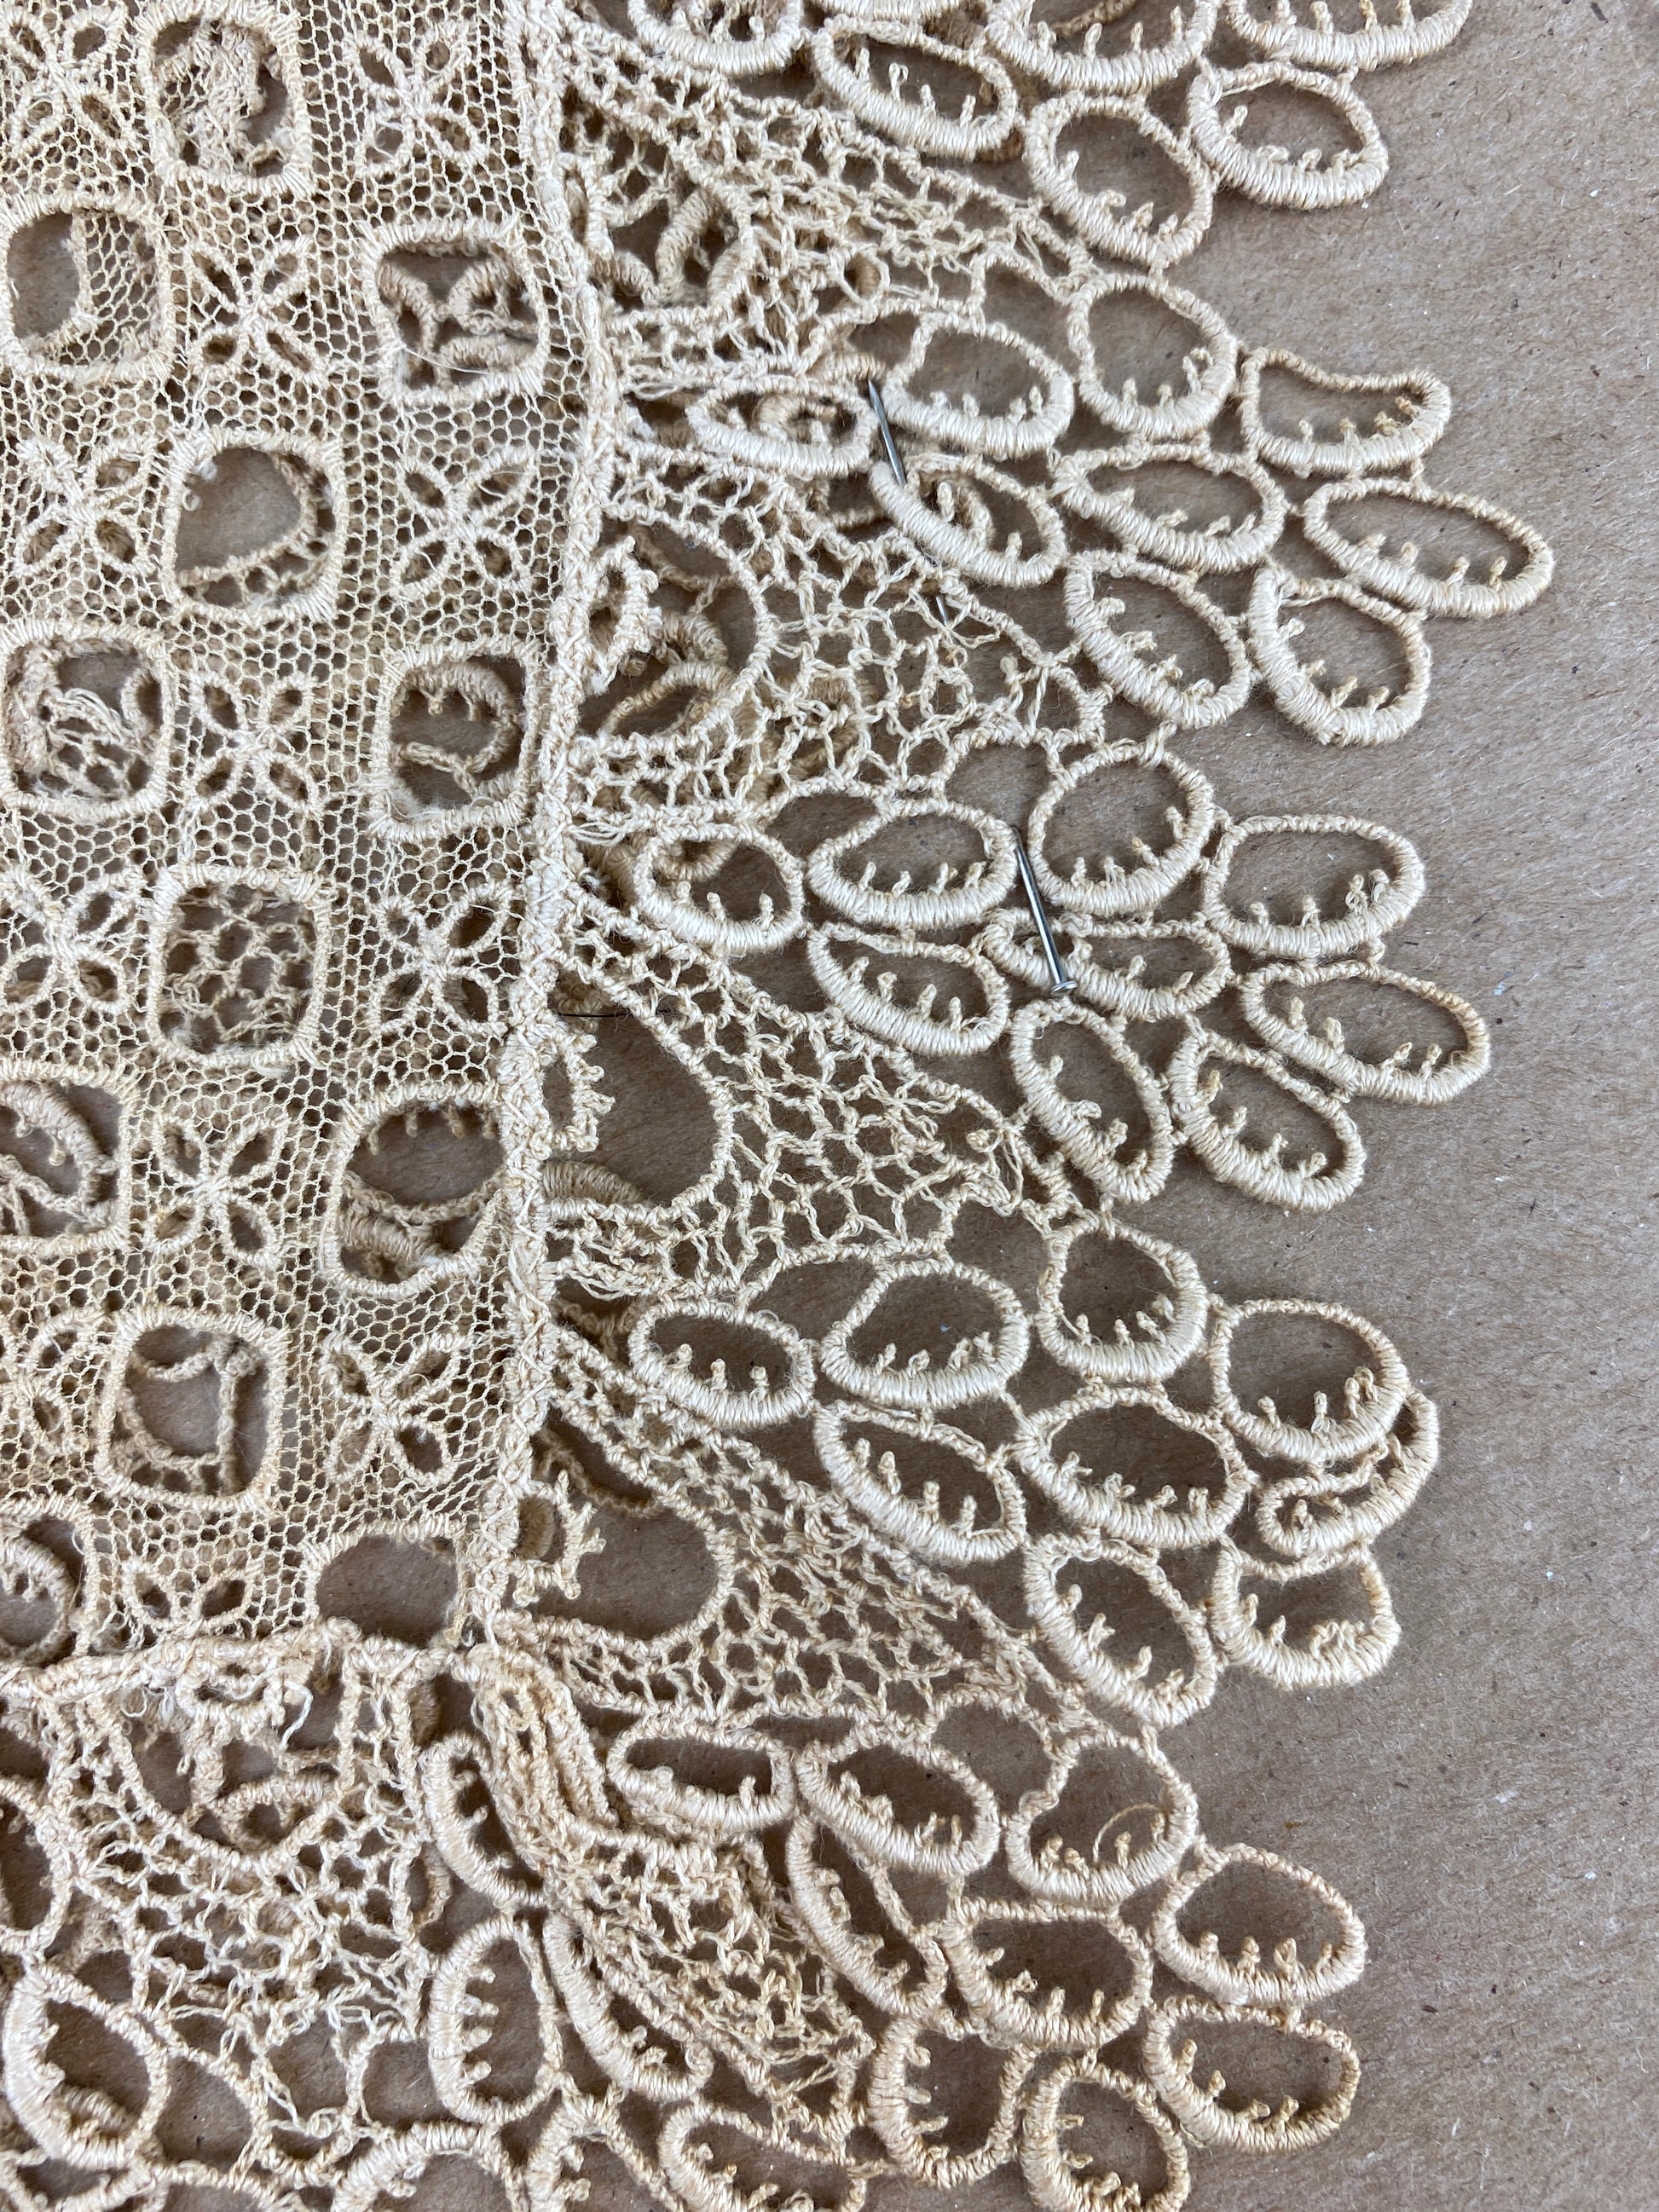 Antique Handmade Lace Collar with Crochet Button, Edwardian 1900s, 4 inches  wide